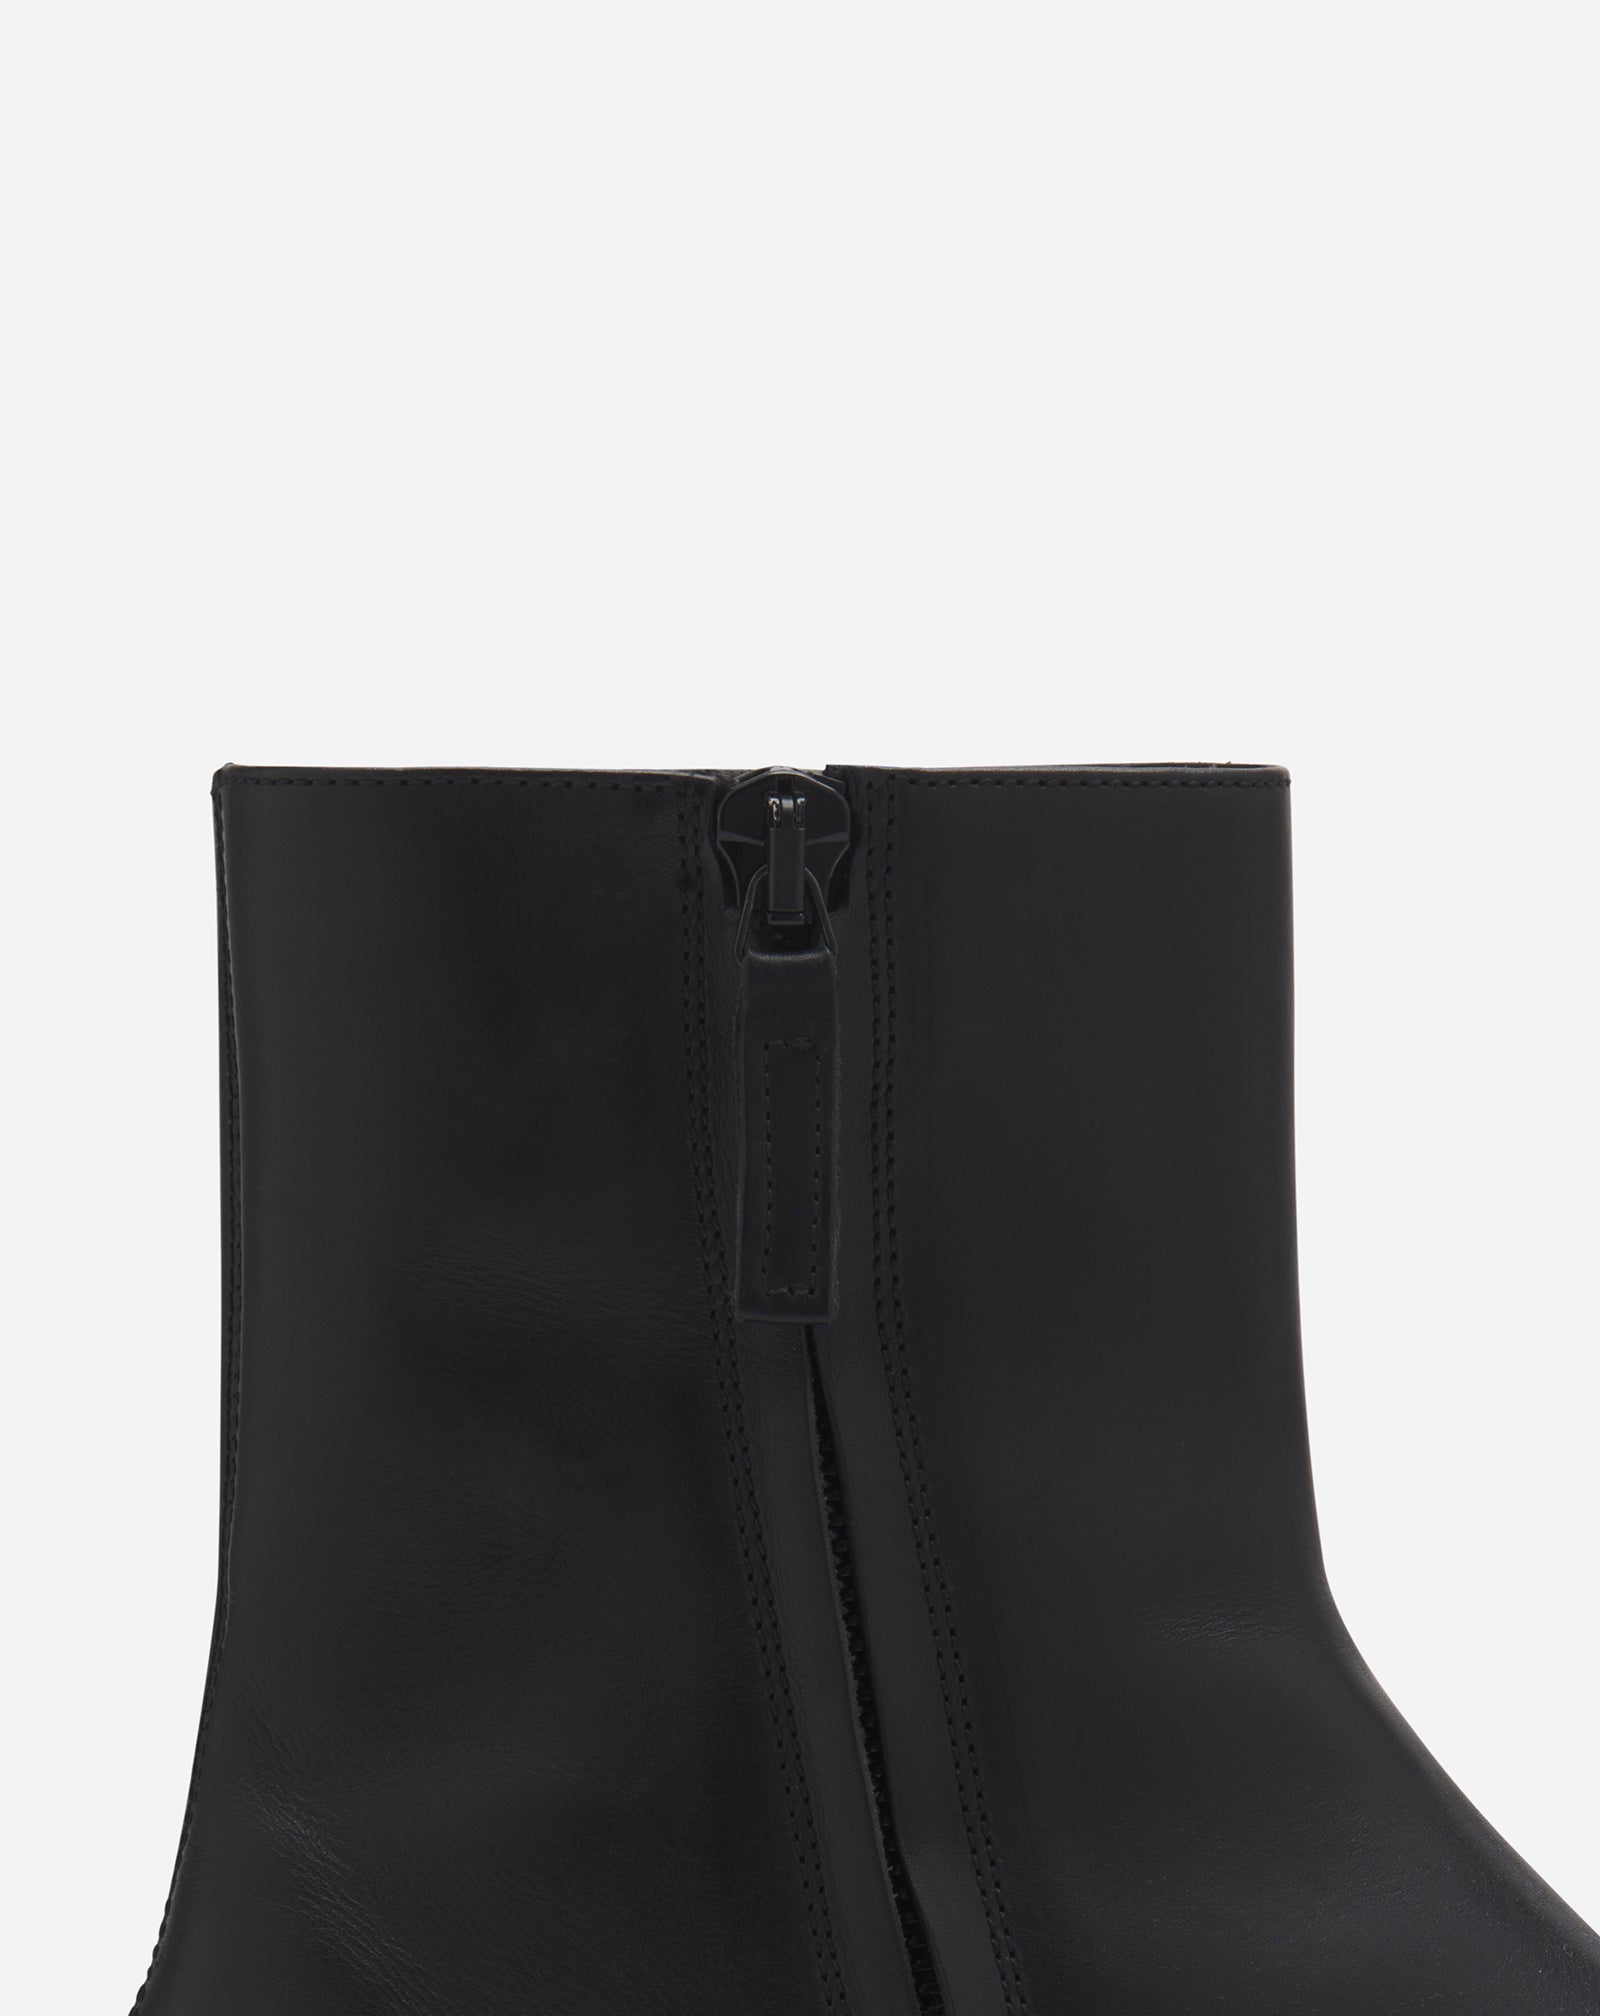 MEDLEY LEATHER BOOTS